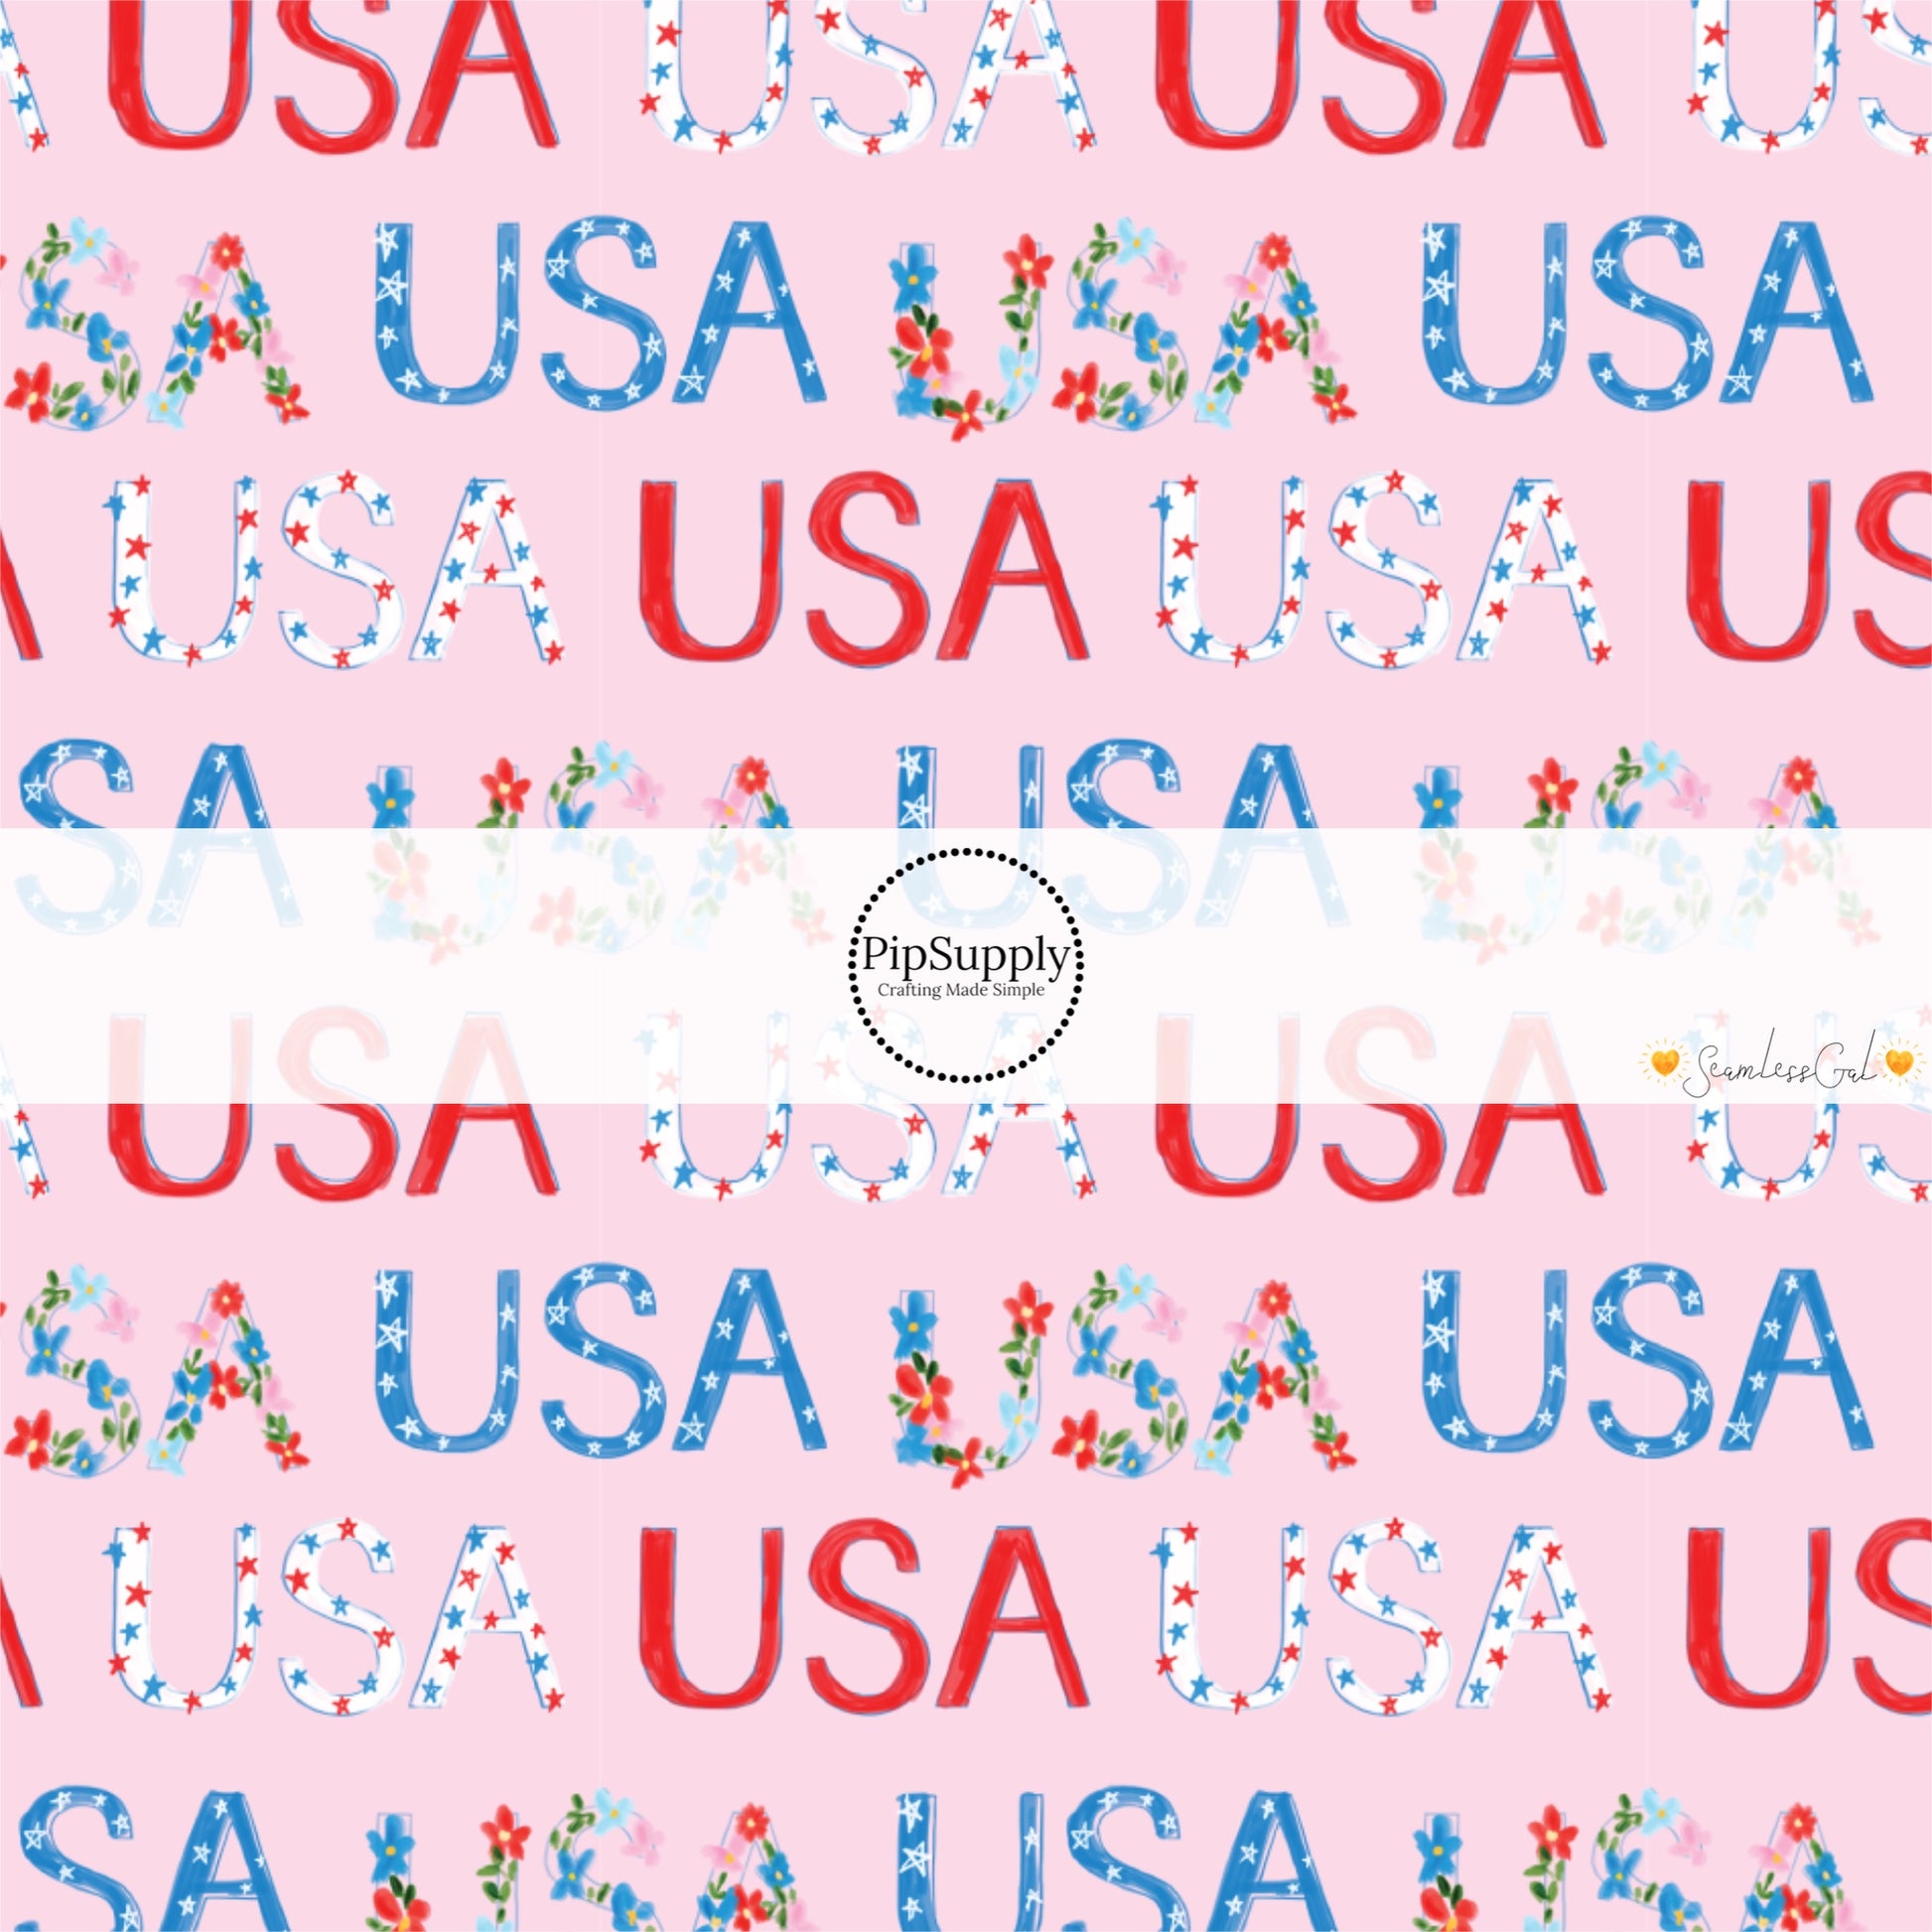 This 4th of July fabric by the yard features patterned "USA" words on light pink. This fun patriotic themed fabric can be used for all your sewing and crafting needs!